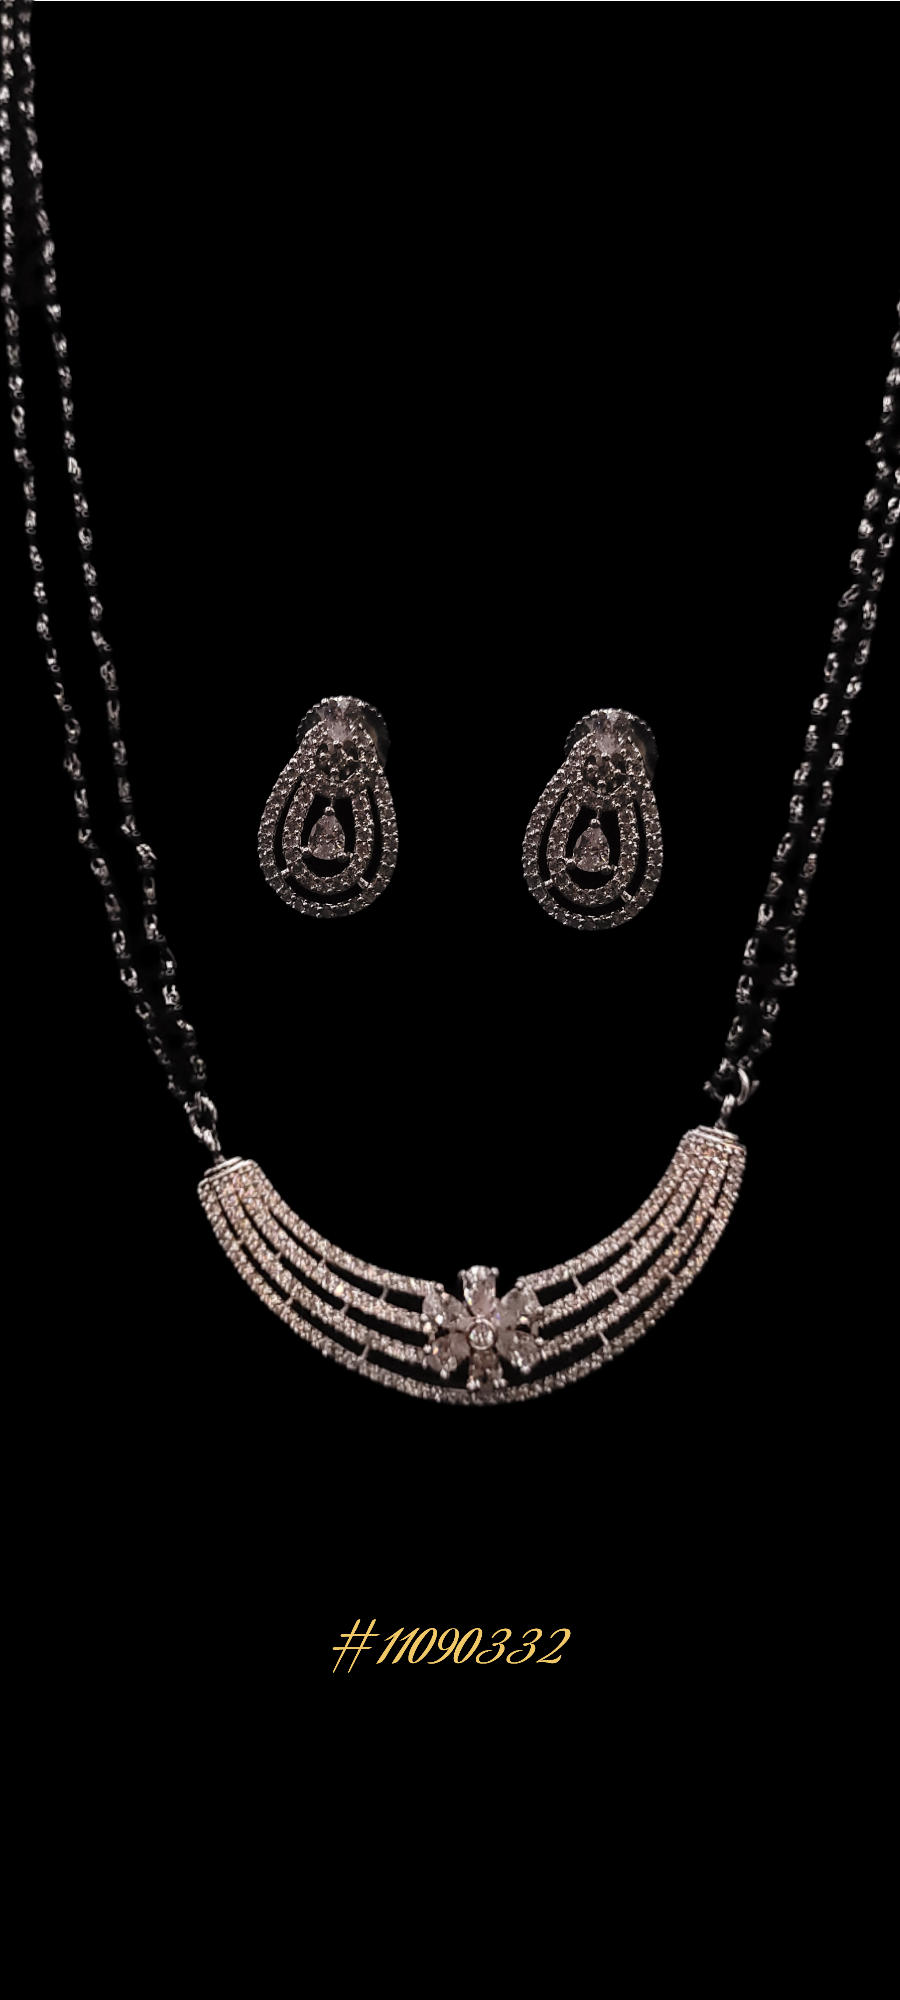 ELEGANT DIAMOND DESIGN IN SILVER COLOR WITH MANGALSUTRA SET